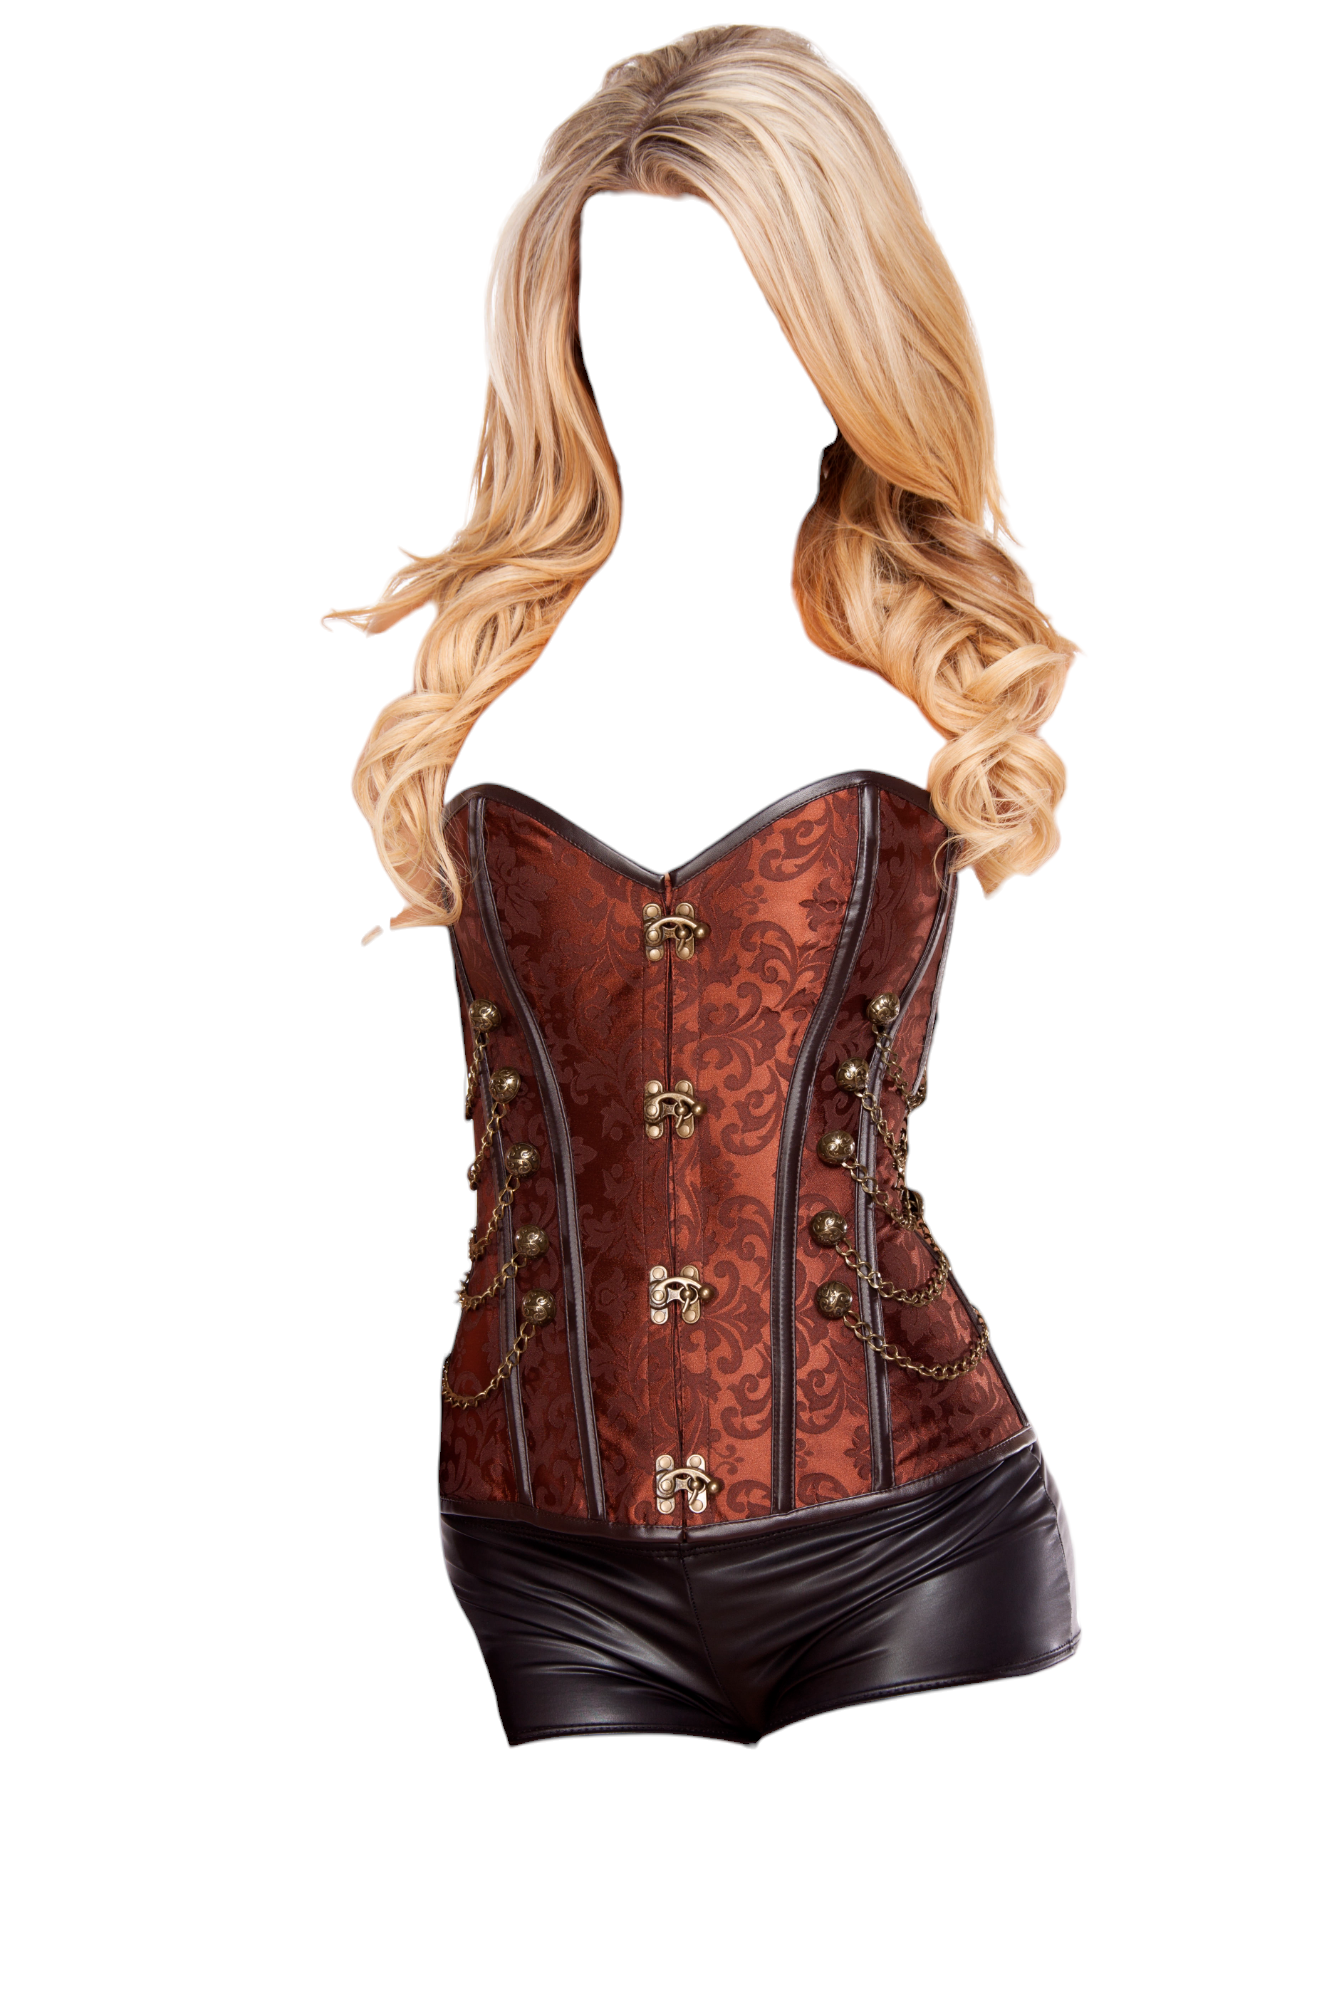 Roma Costume Elegant Corset With Front Clasp Brown/Bronze